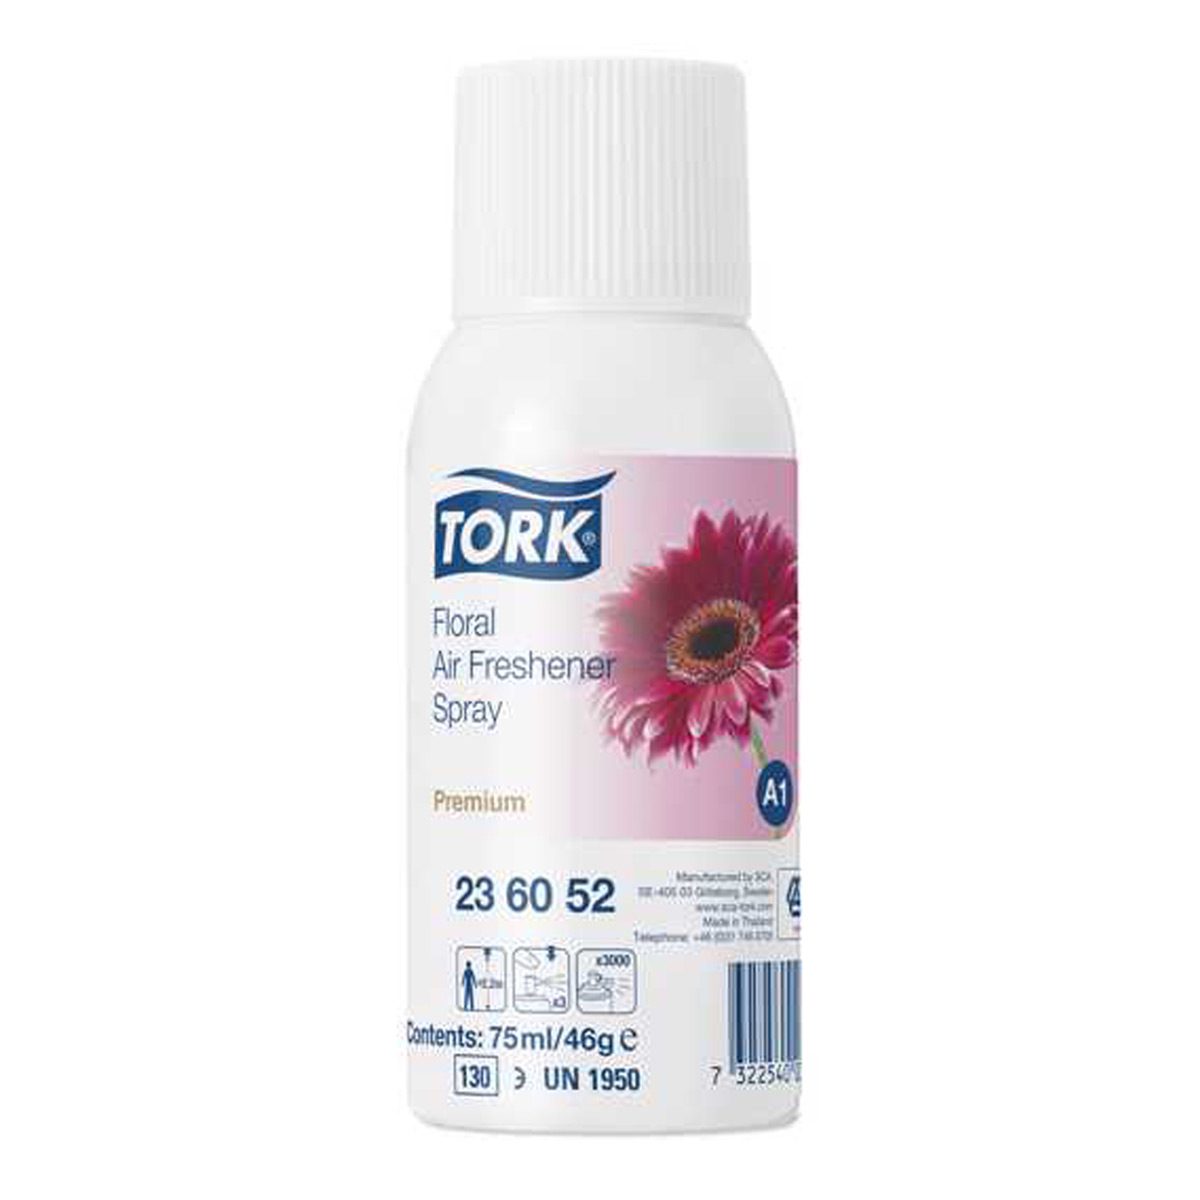 cleaning-products-odour-pest-tork-floral-air-freshener-spray-75ml-premium-control-odours-effectively-efficiently-concentrated-fragrance-oils-vjs-distributors-236052